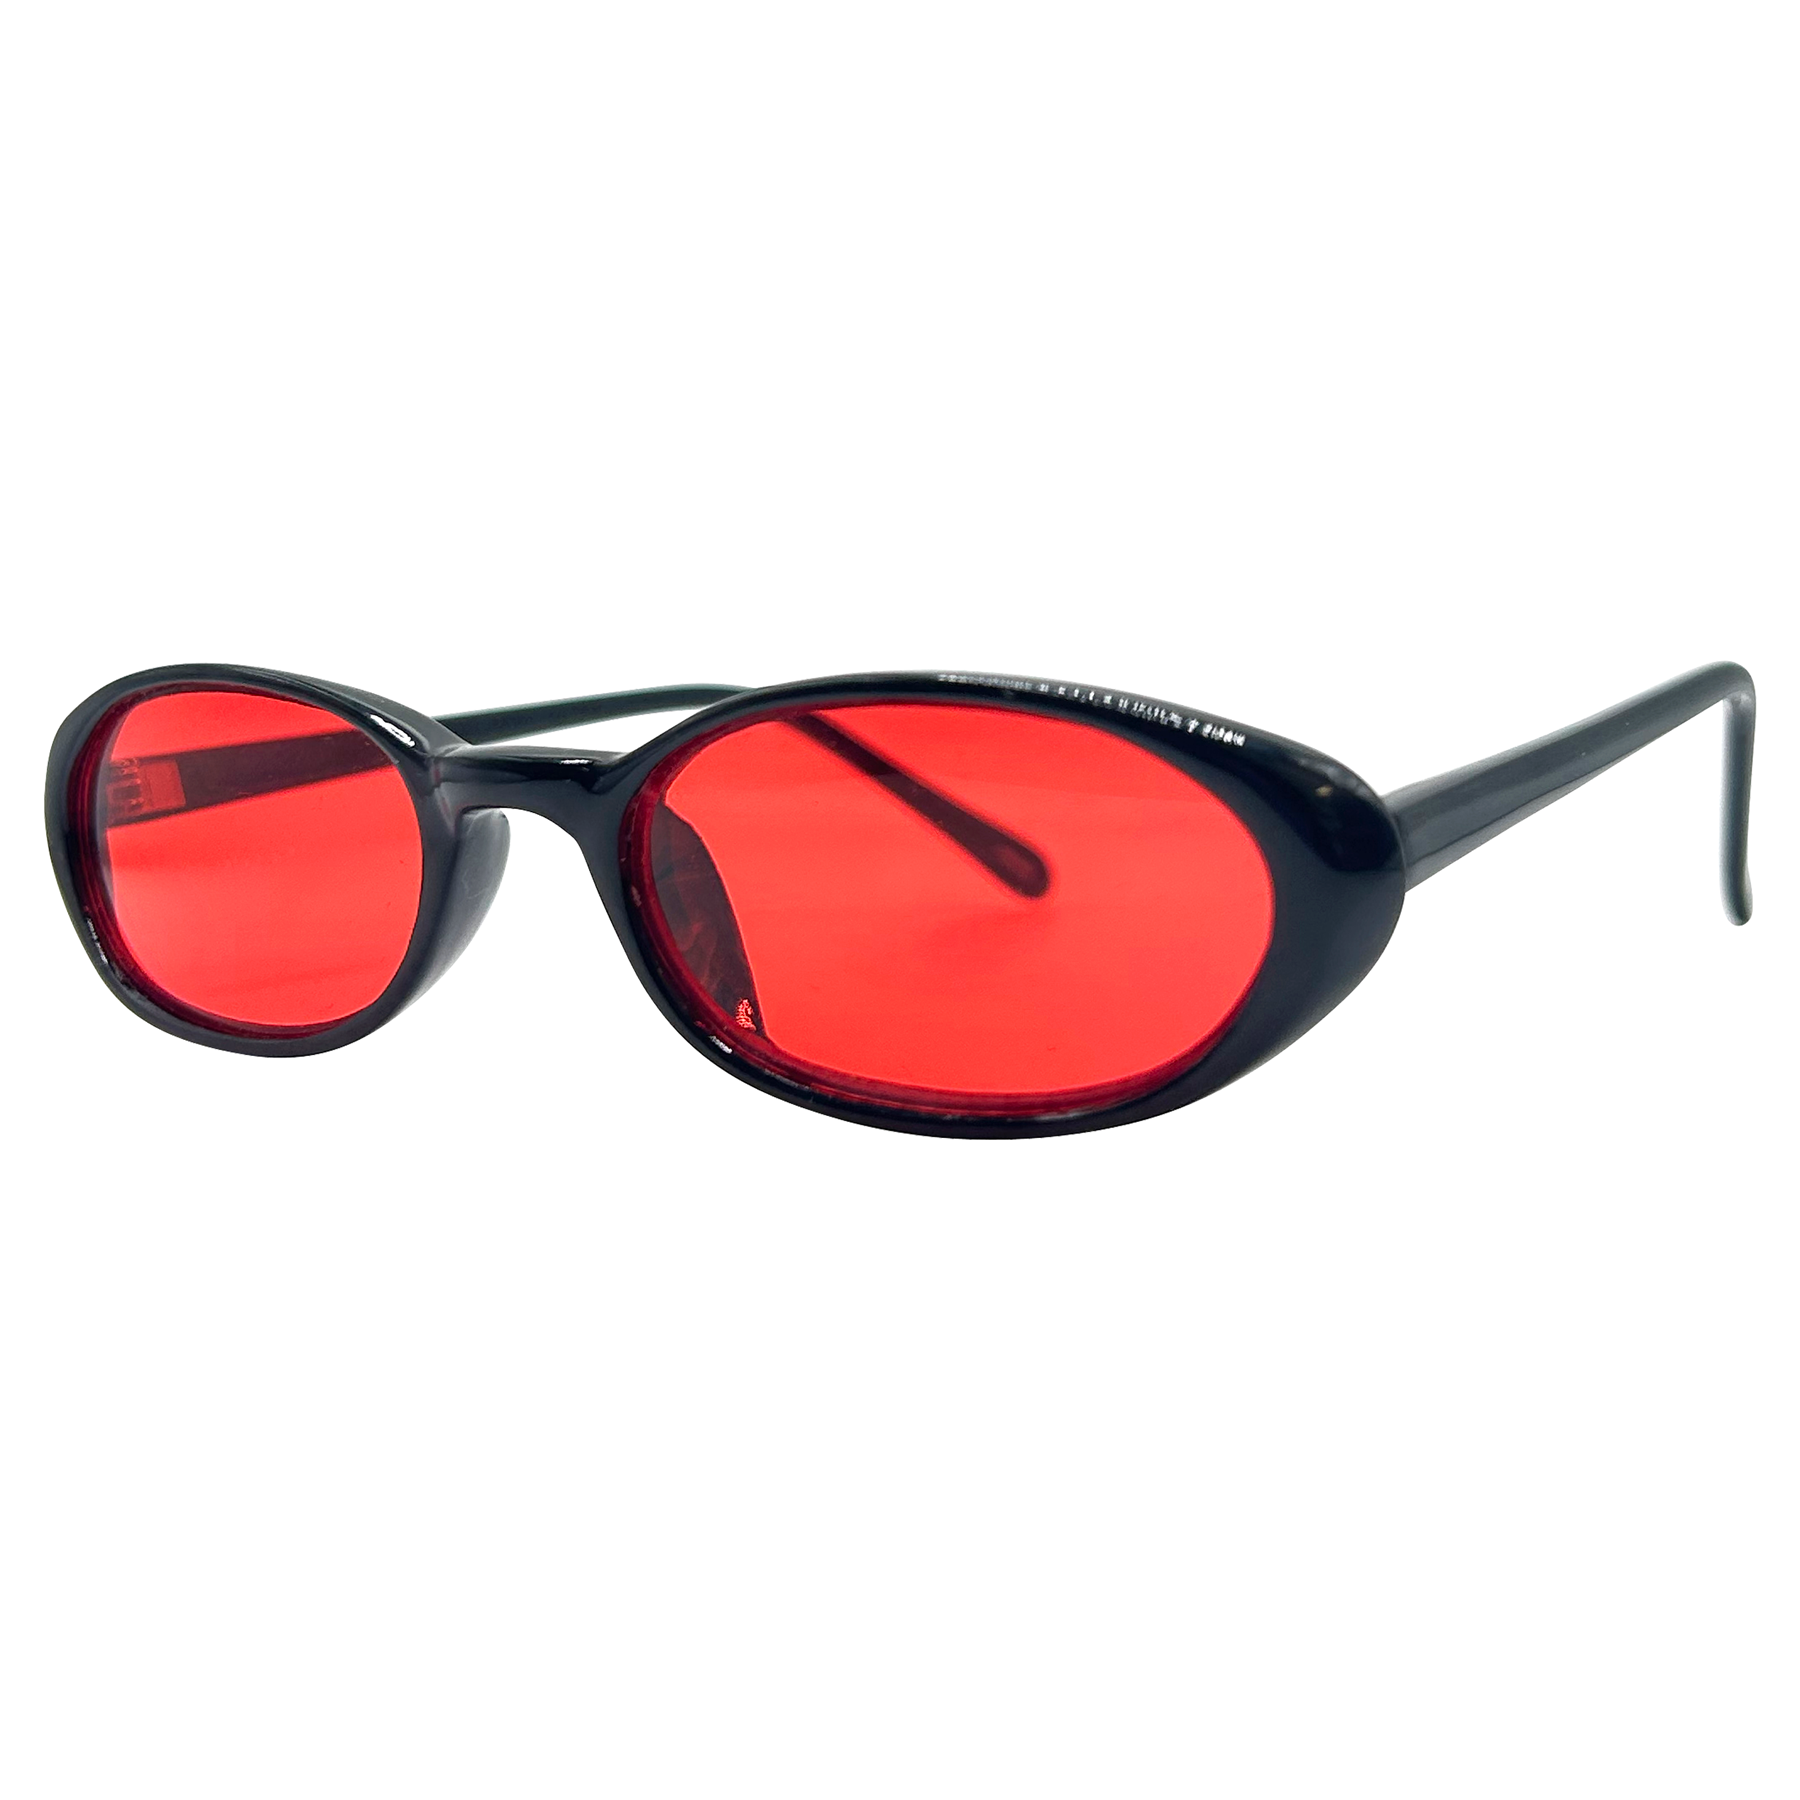 JAMMERS Black/Red Square Sunglasses